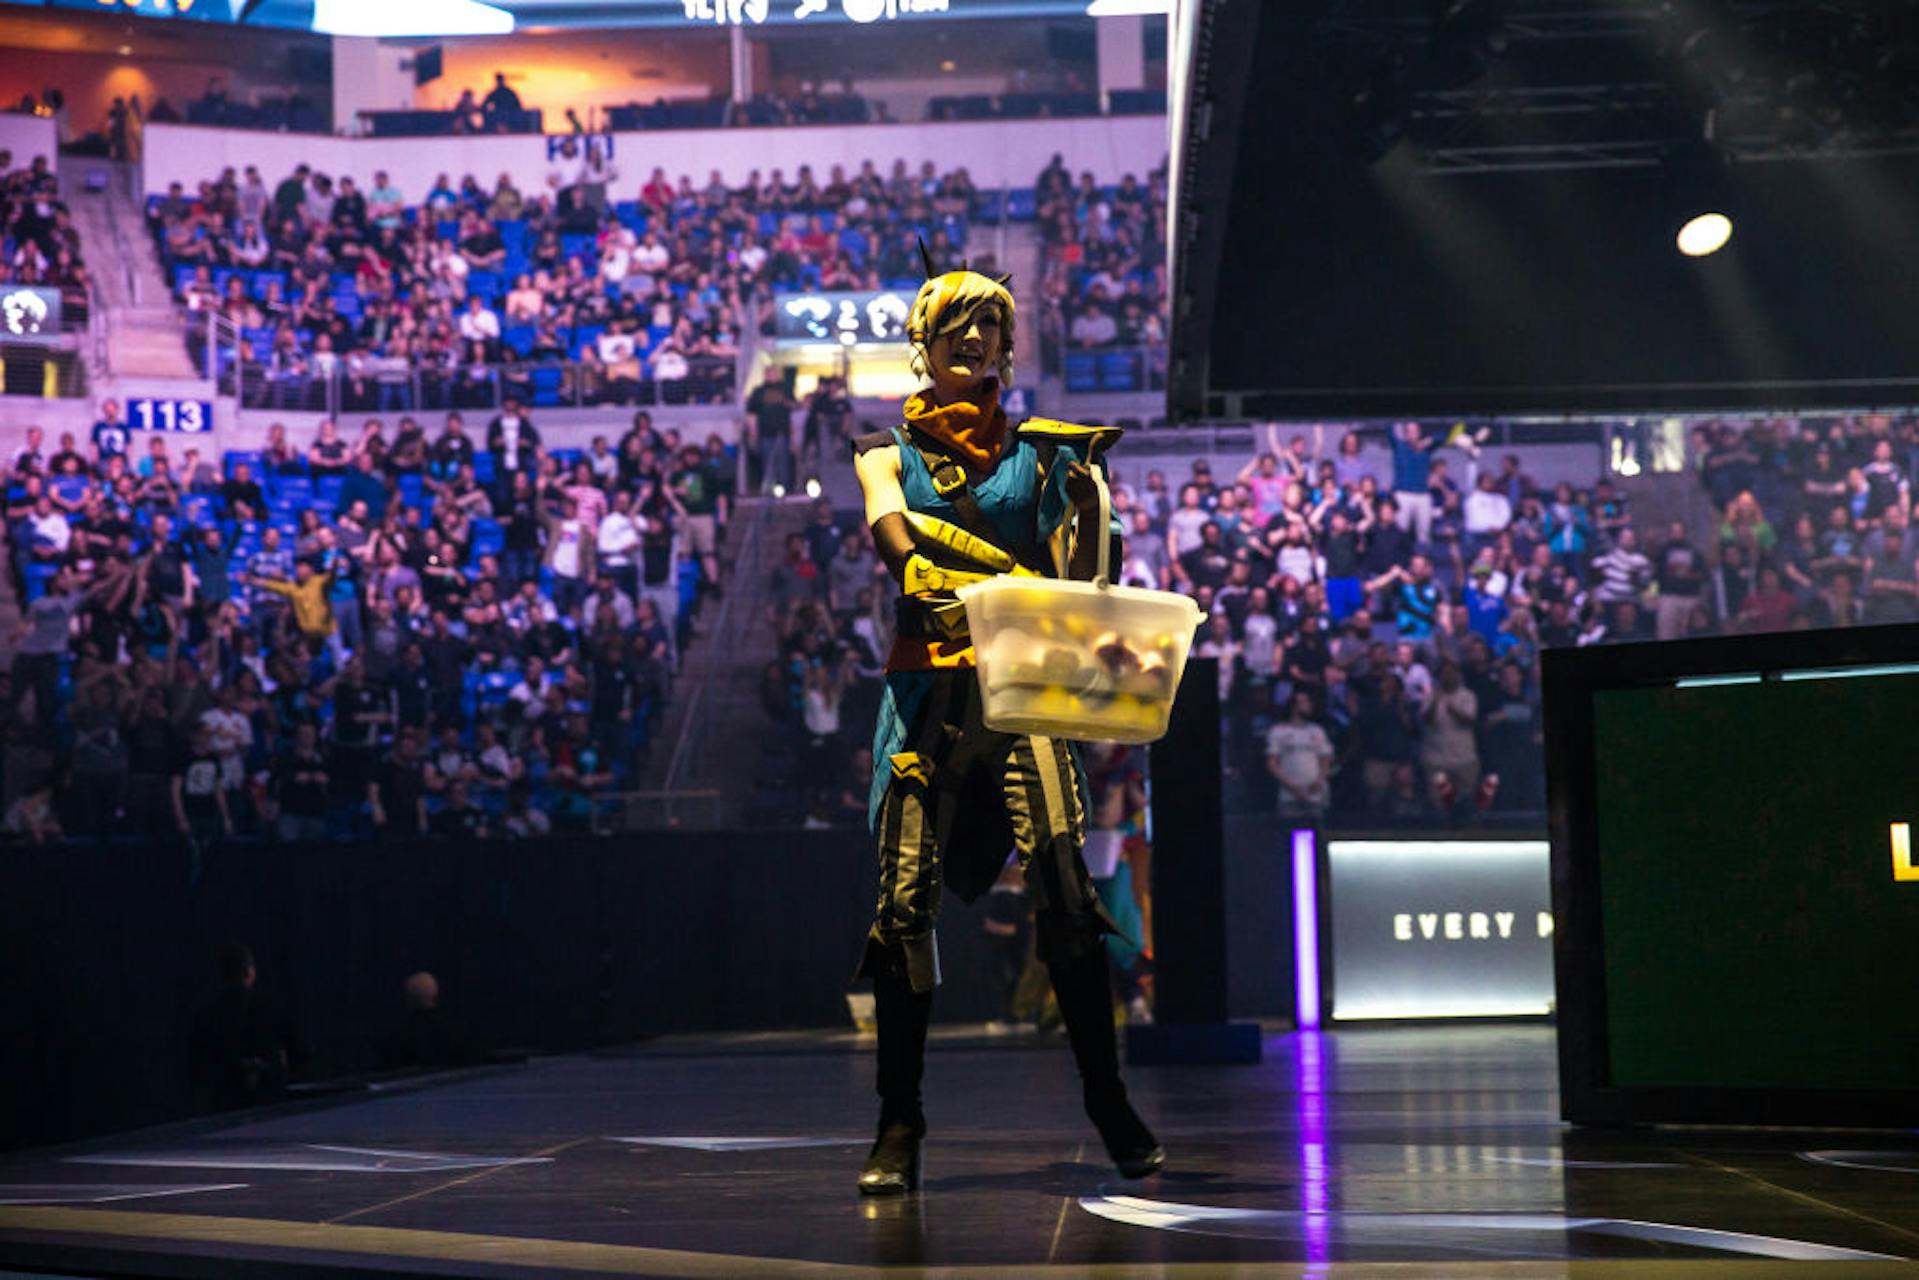 Louis Vuitton ventures into esports with Riot Games: A new